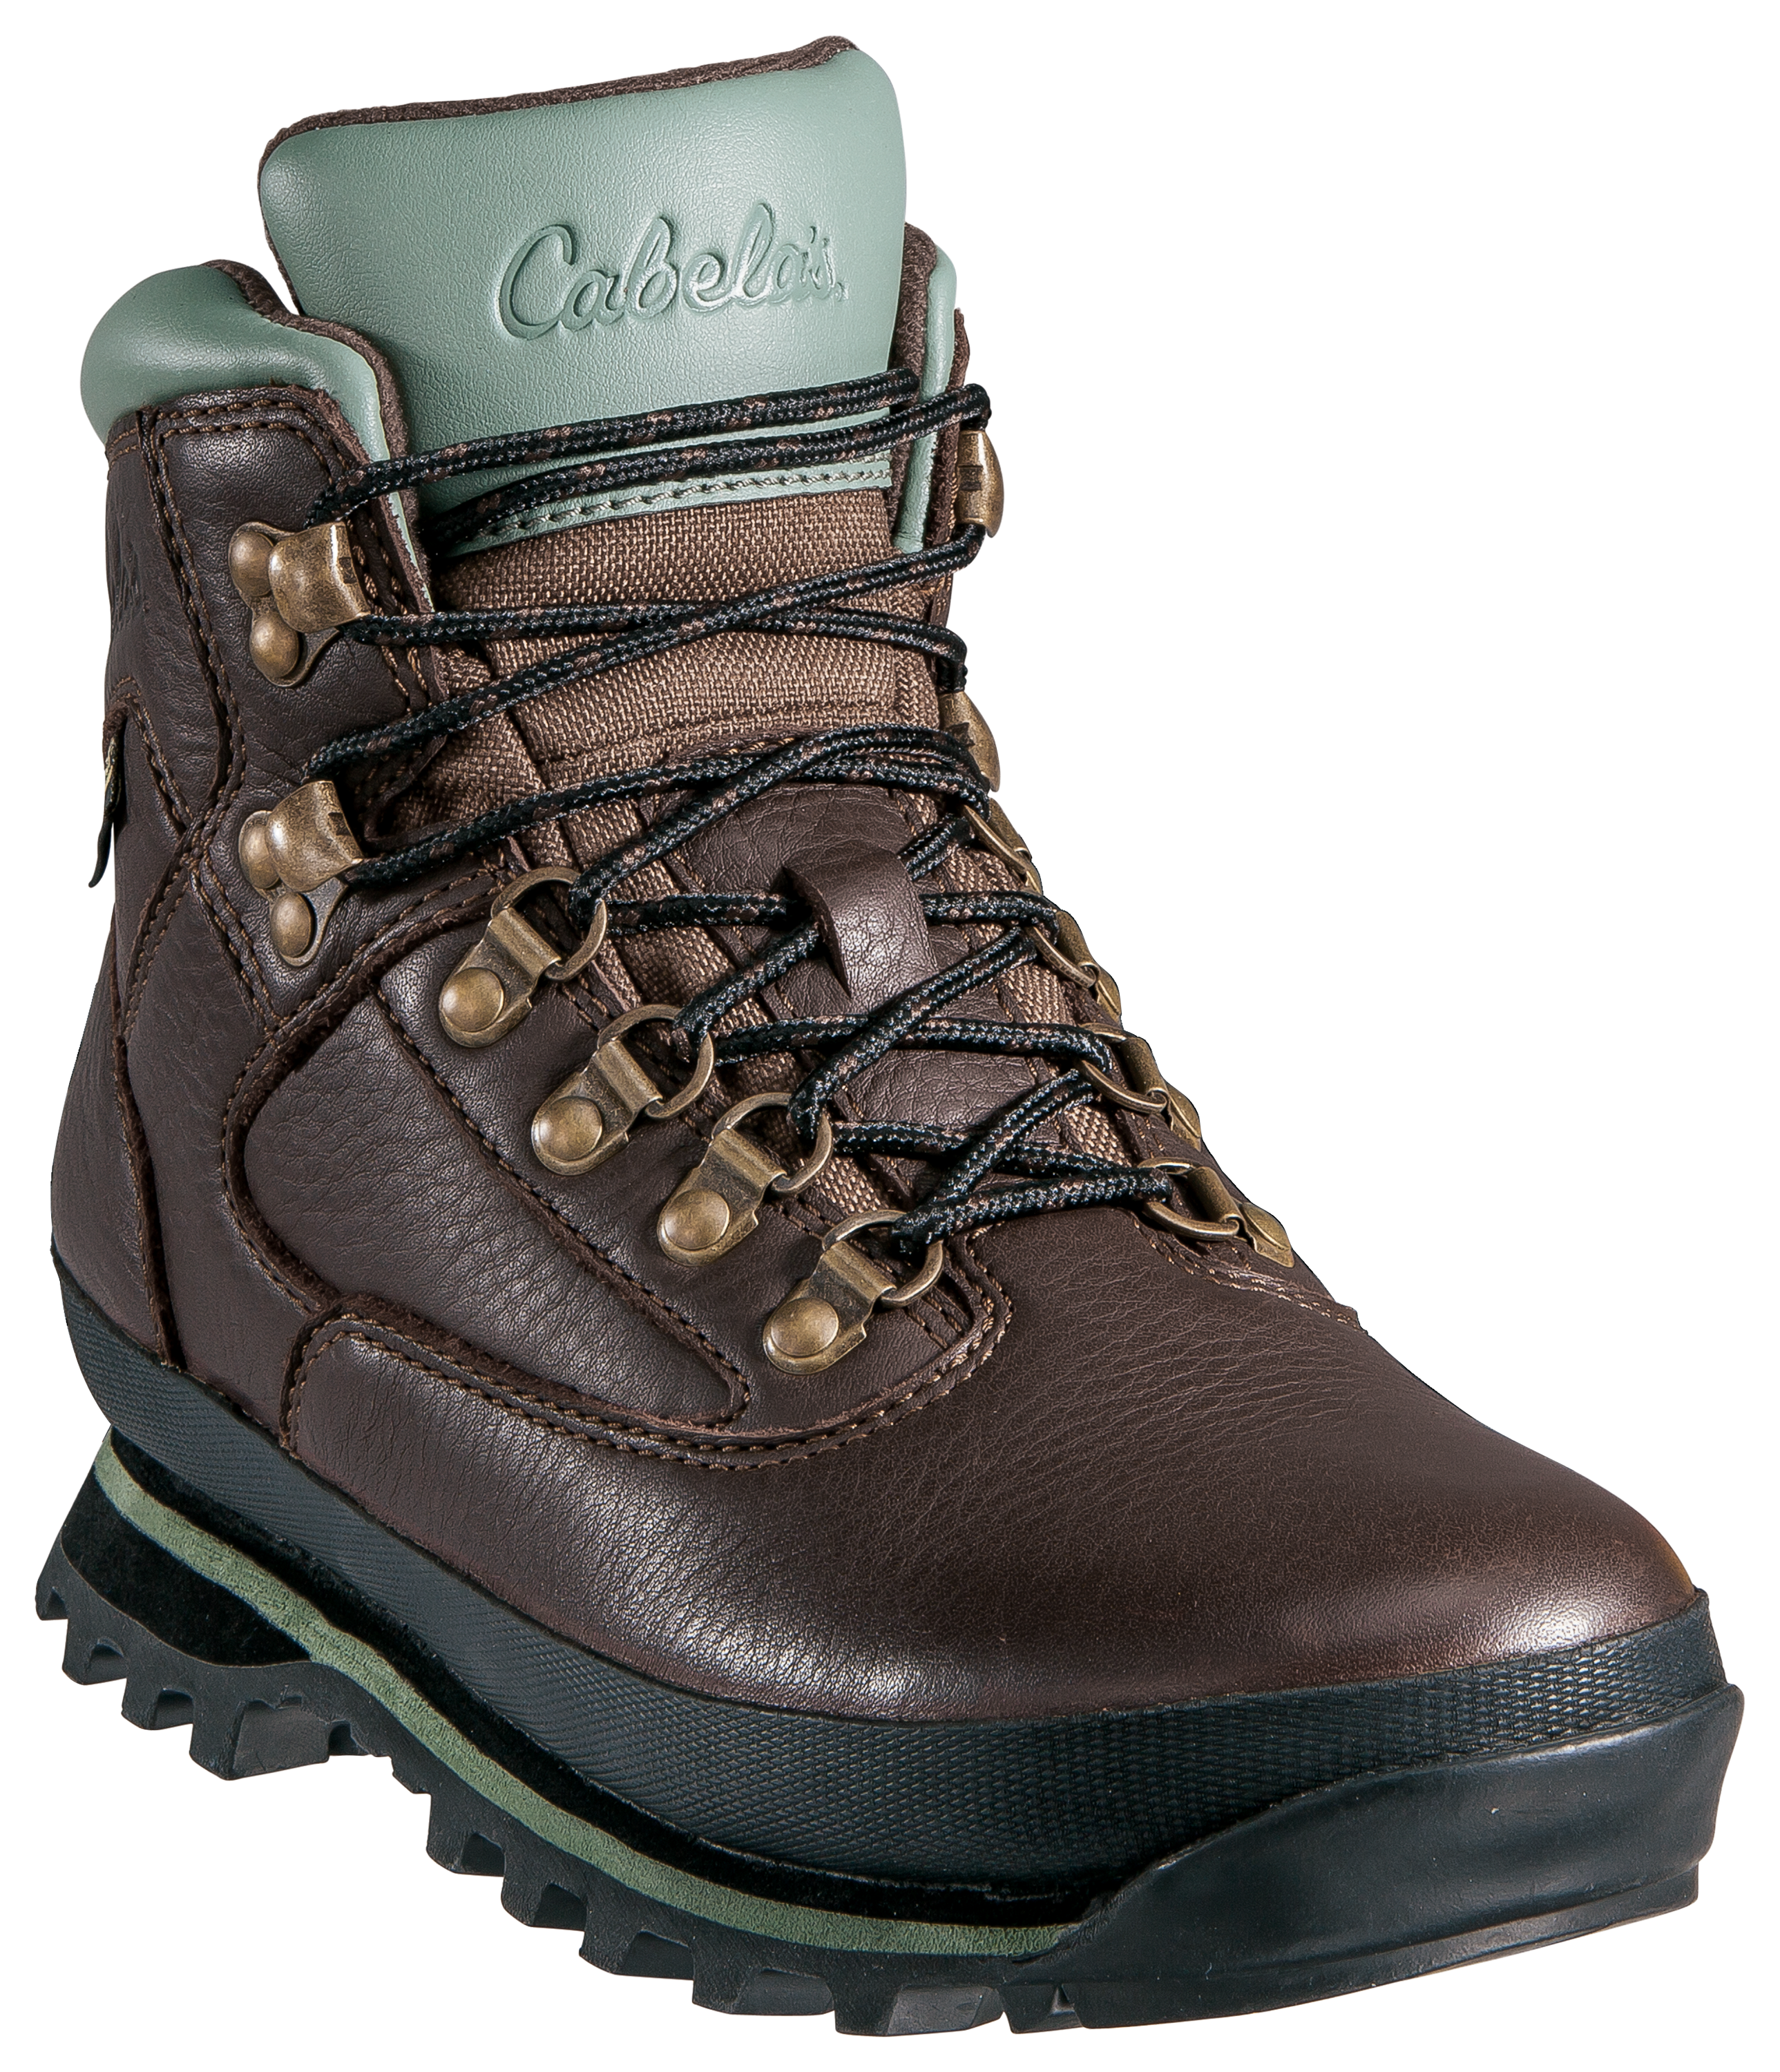 Cabela's Rimrock Mid GORE-TEX Hiking Boots for Ladies - Brown - 7.5 M